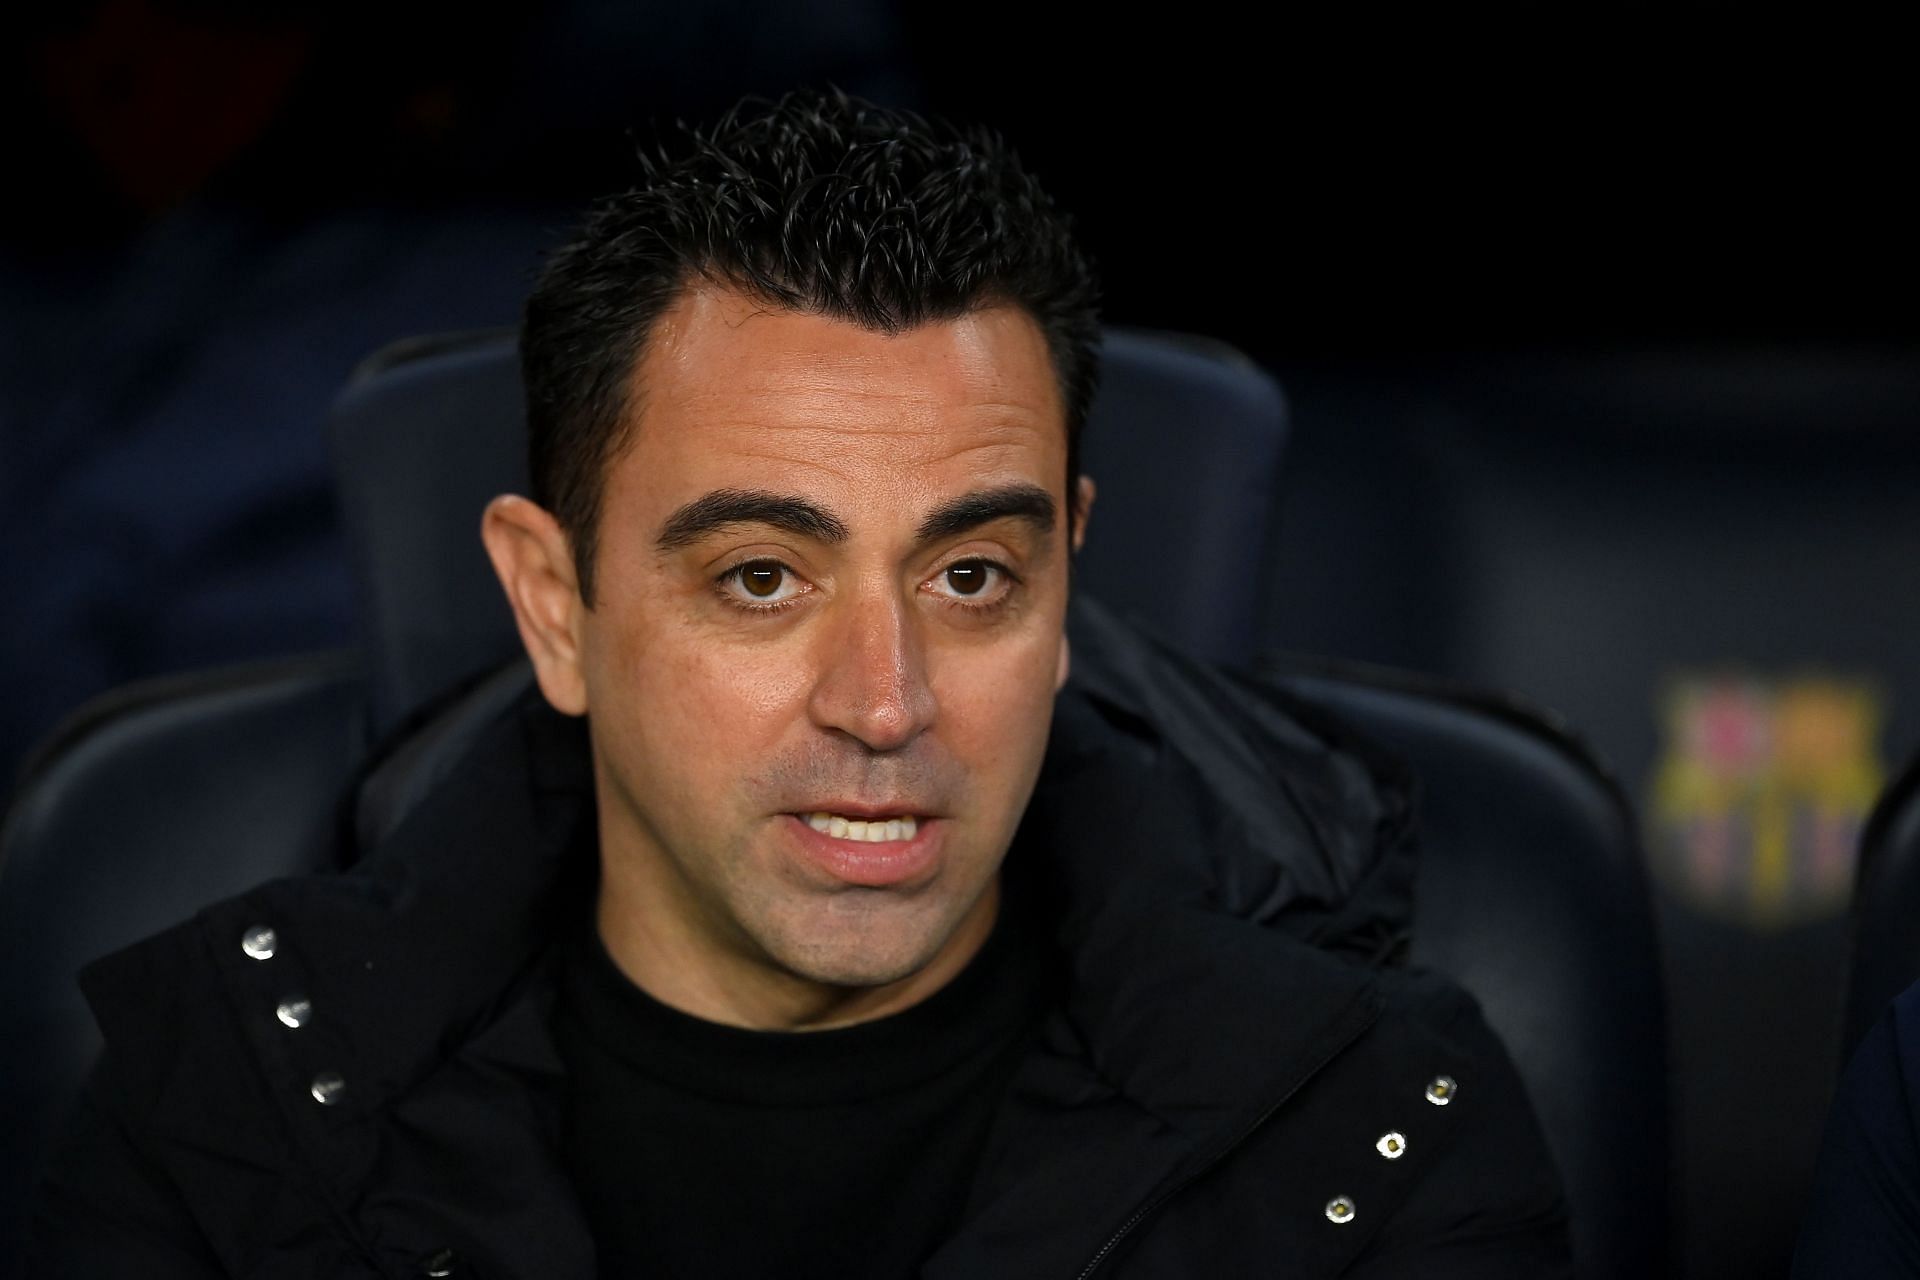 Can Xavi lead Barcelona back to the top?